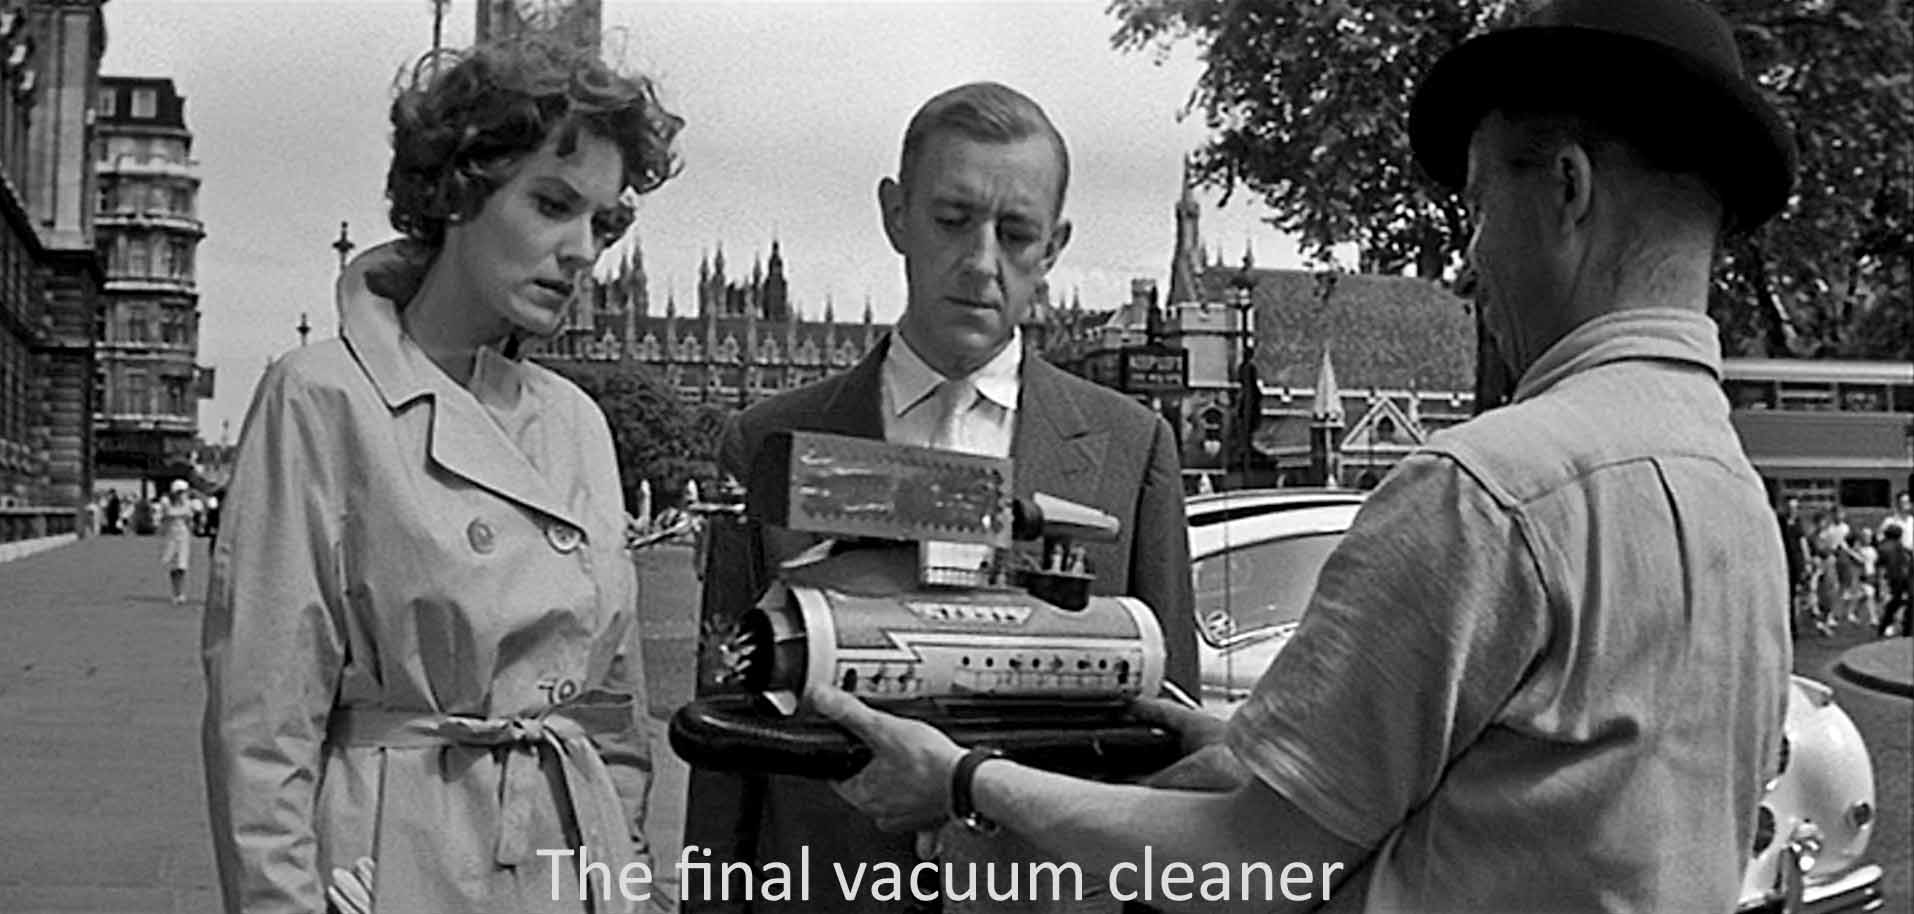 The final vacuum cleaner